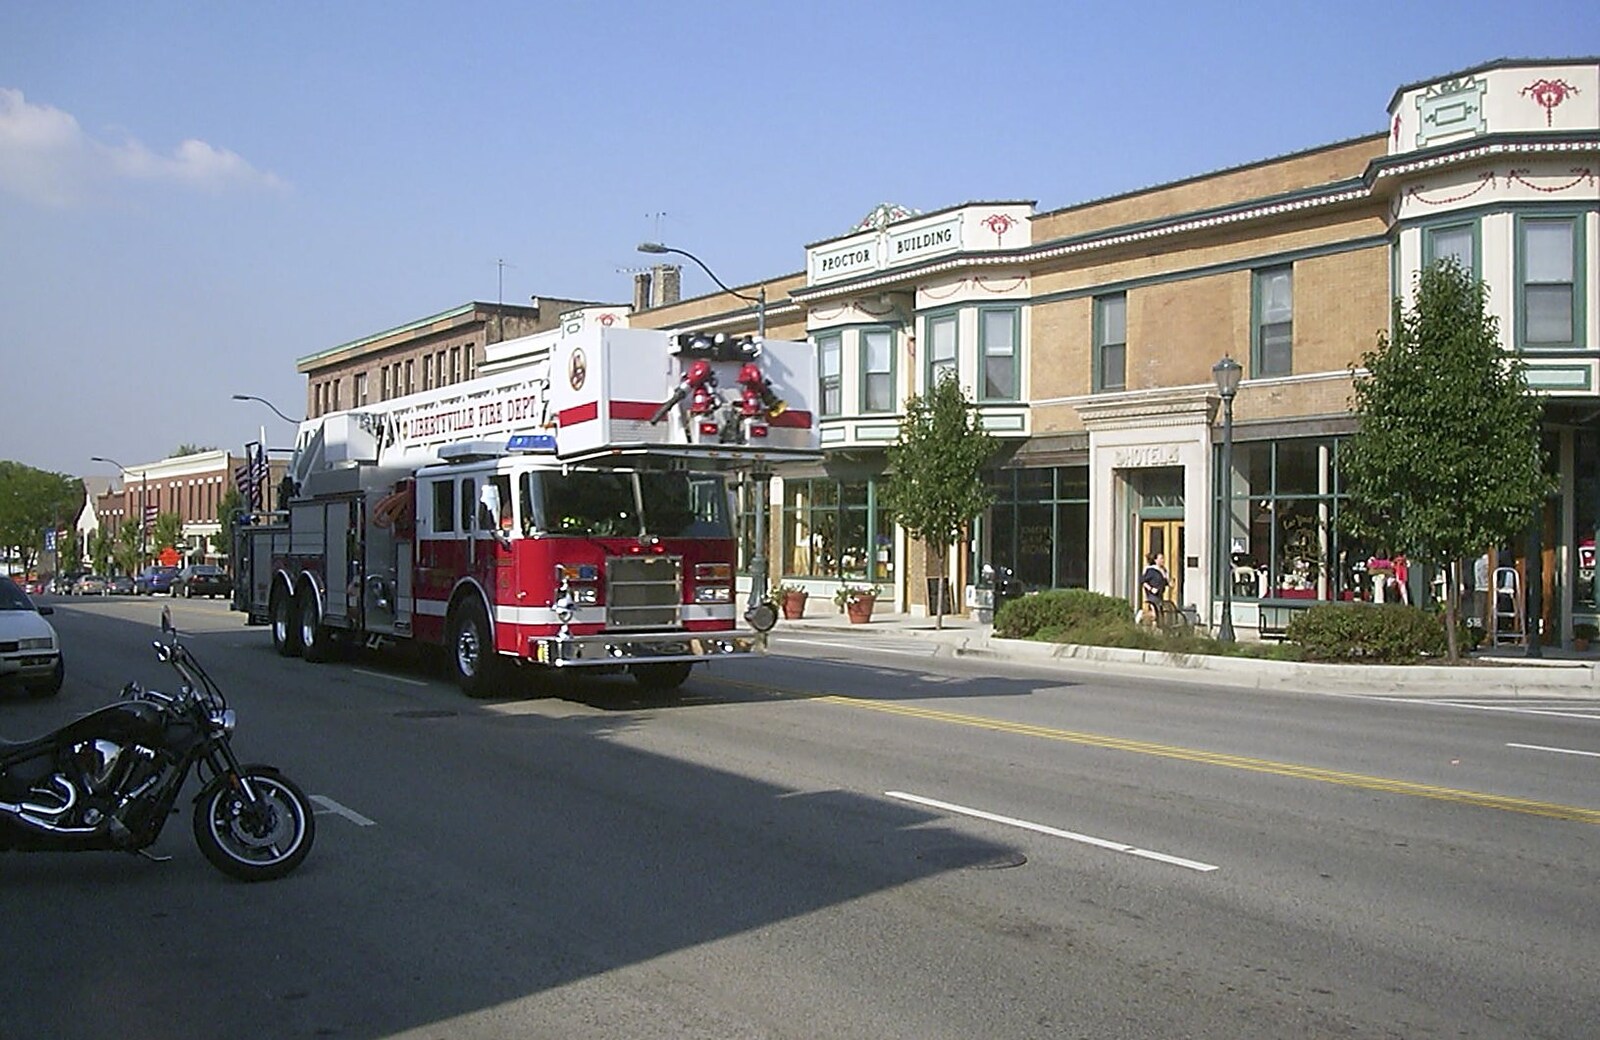 A fire engine rushes past from A Trip to Libertyville, Illinois, USA - 31st August 2004